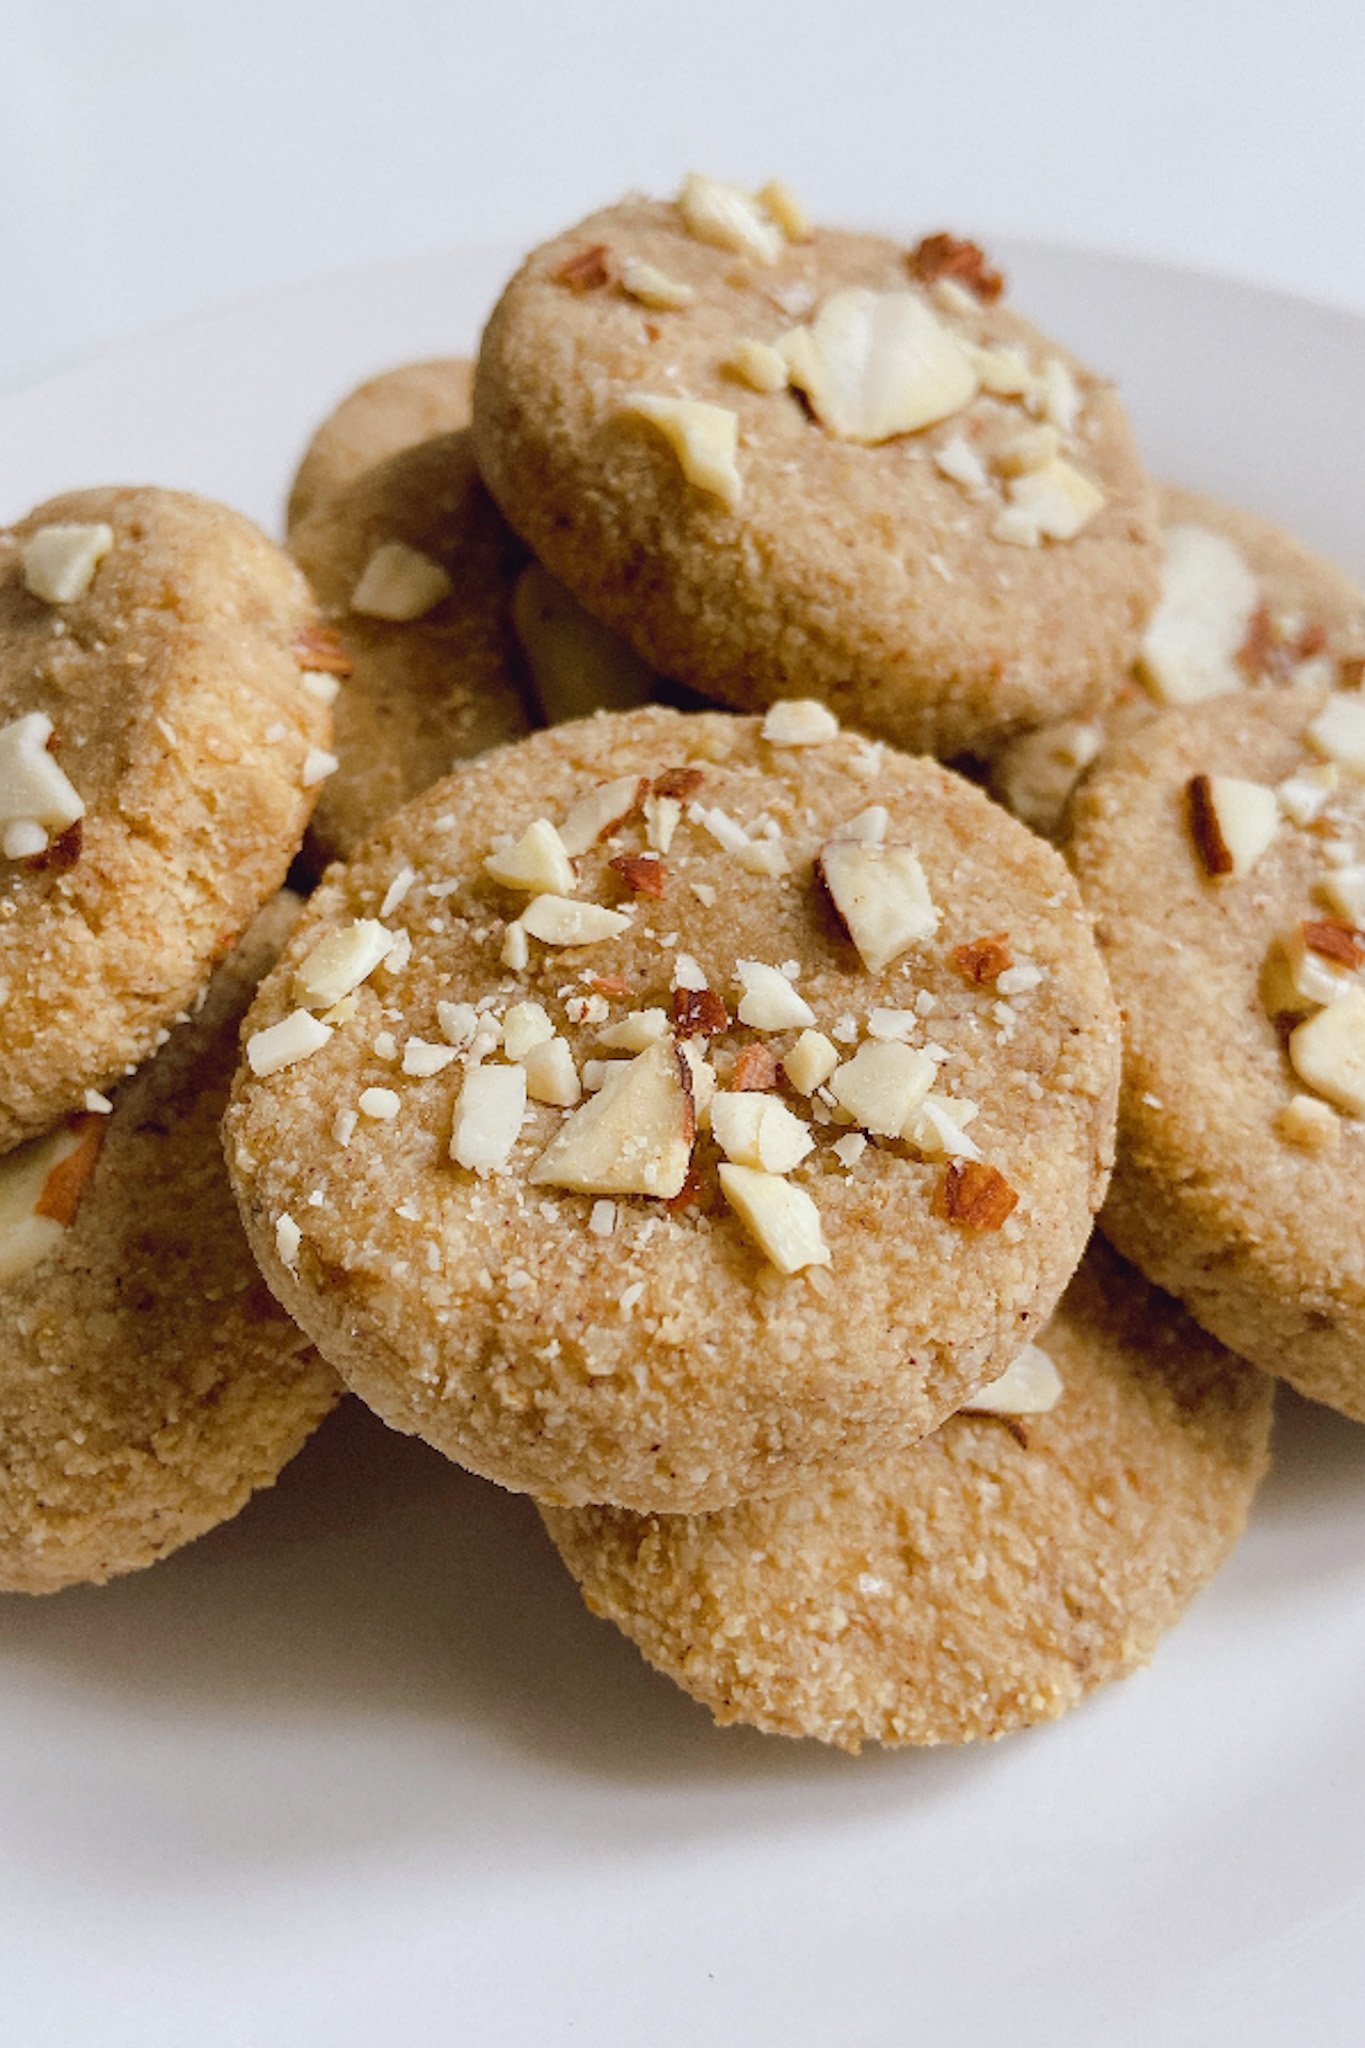 Almond cookies served on a plate